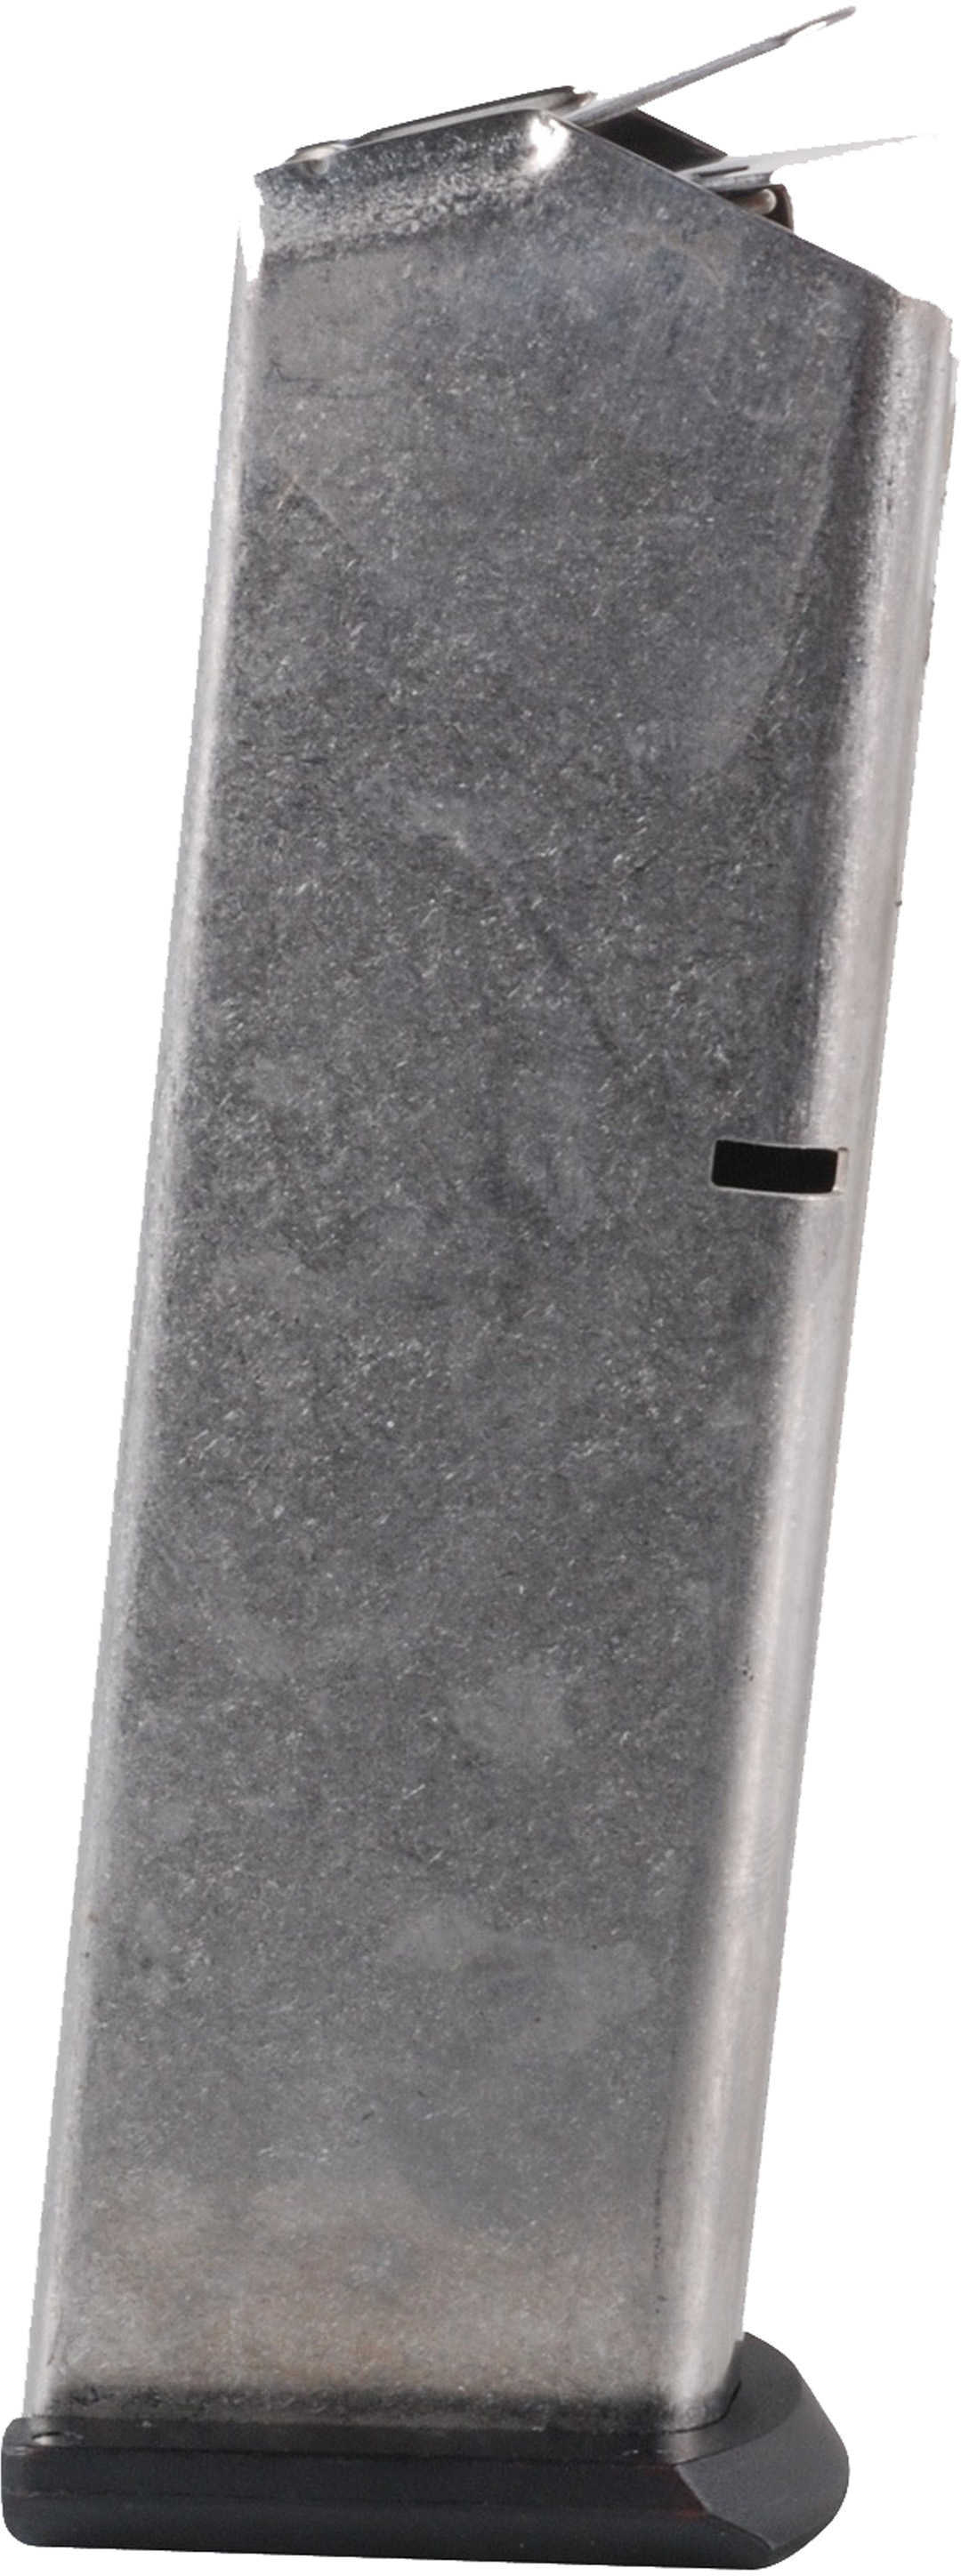 Ruger Magazine 45 ACP 8Rd Stainless Fits Ruger P345 90230